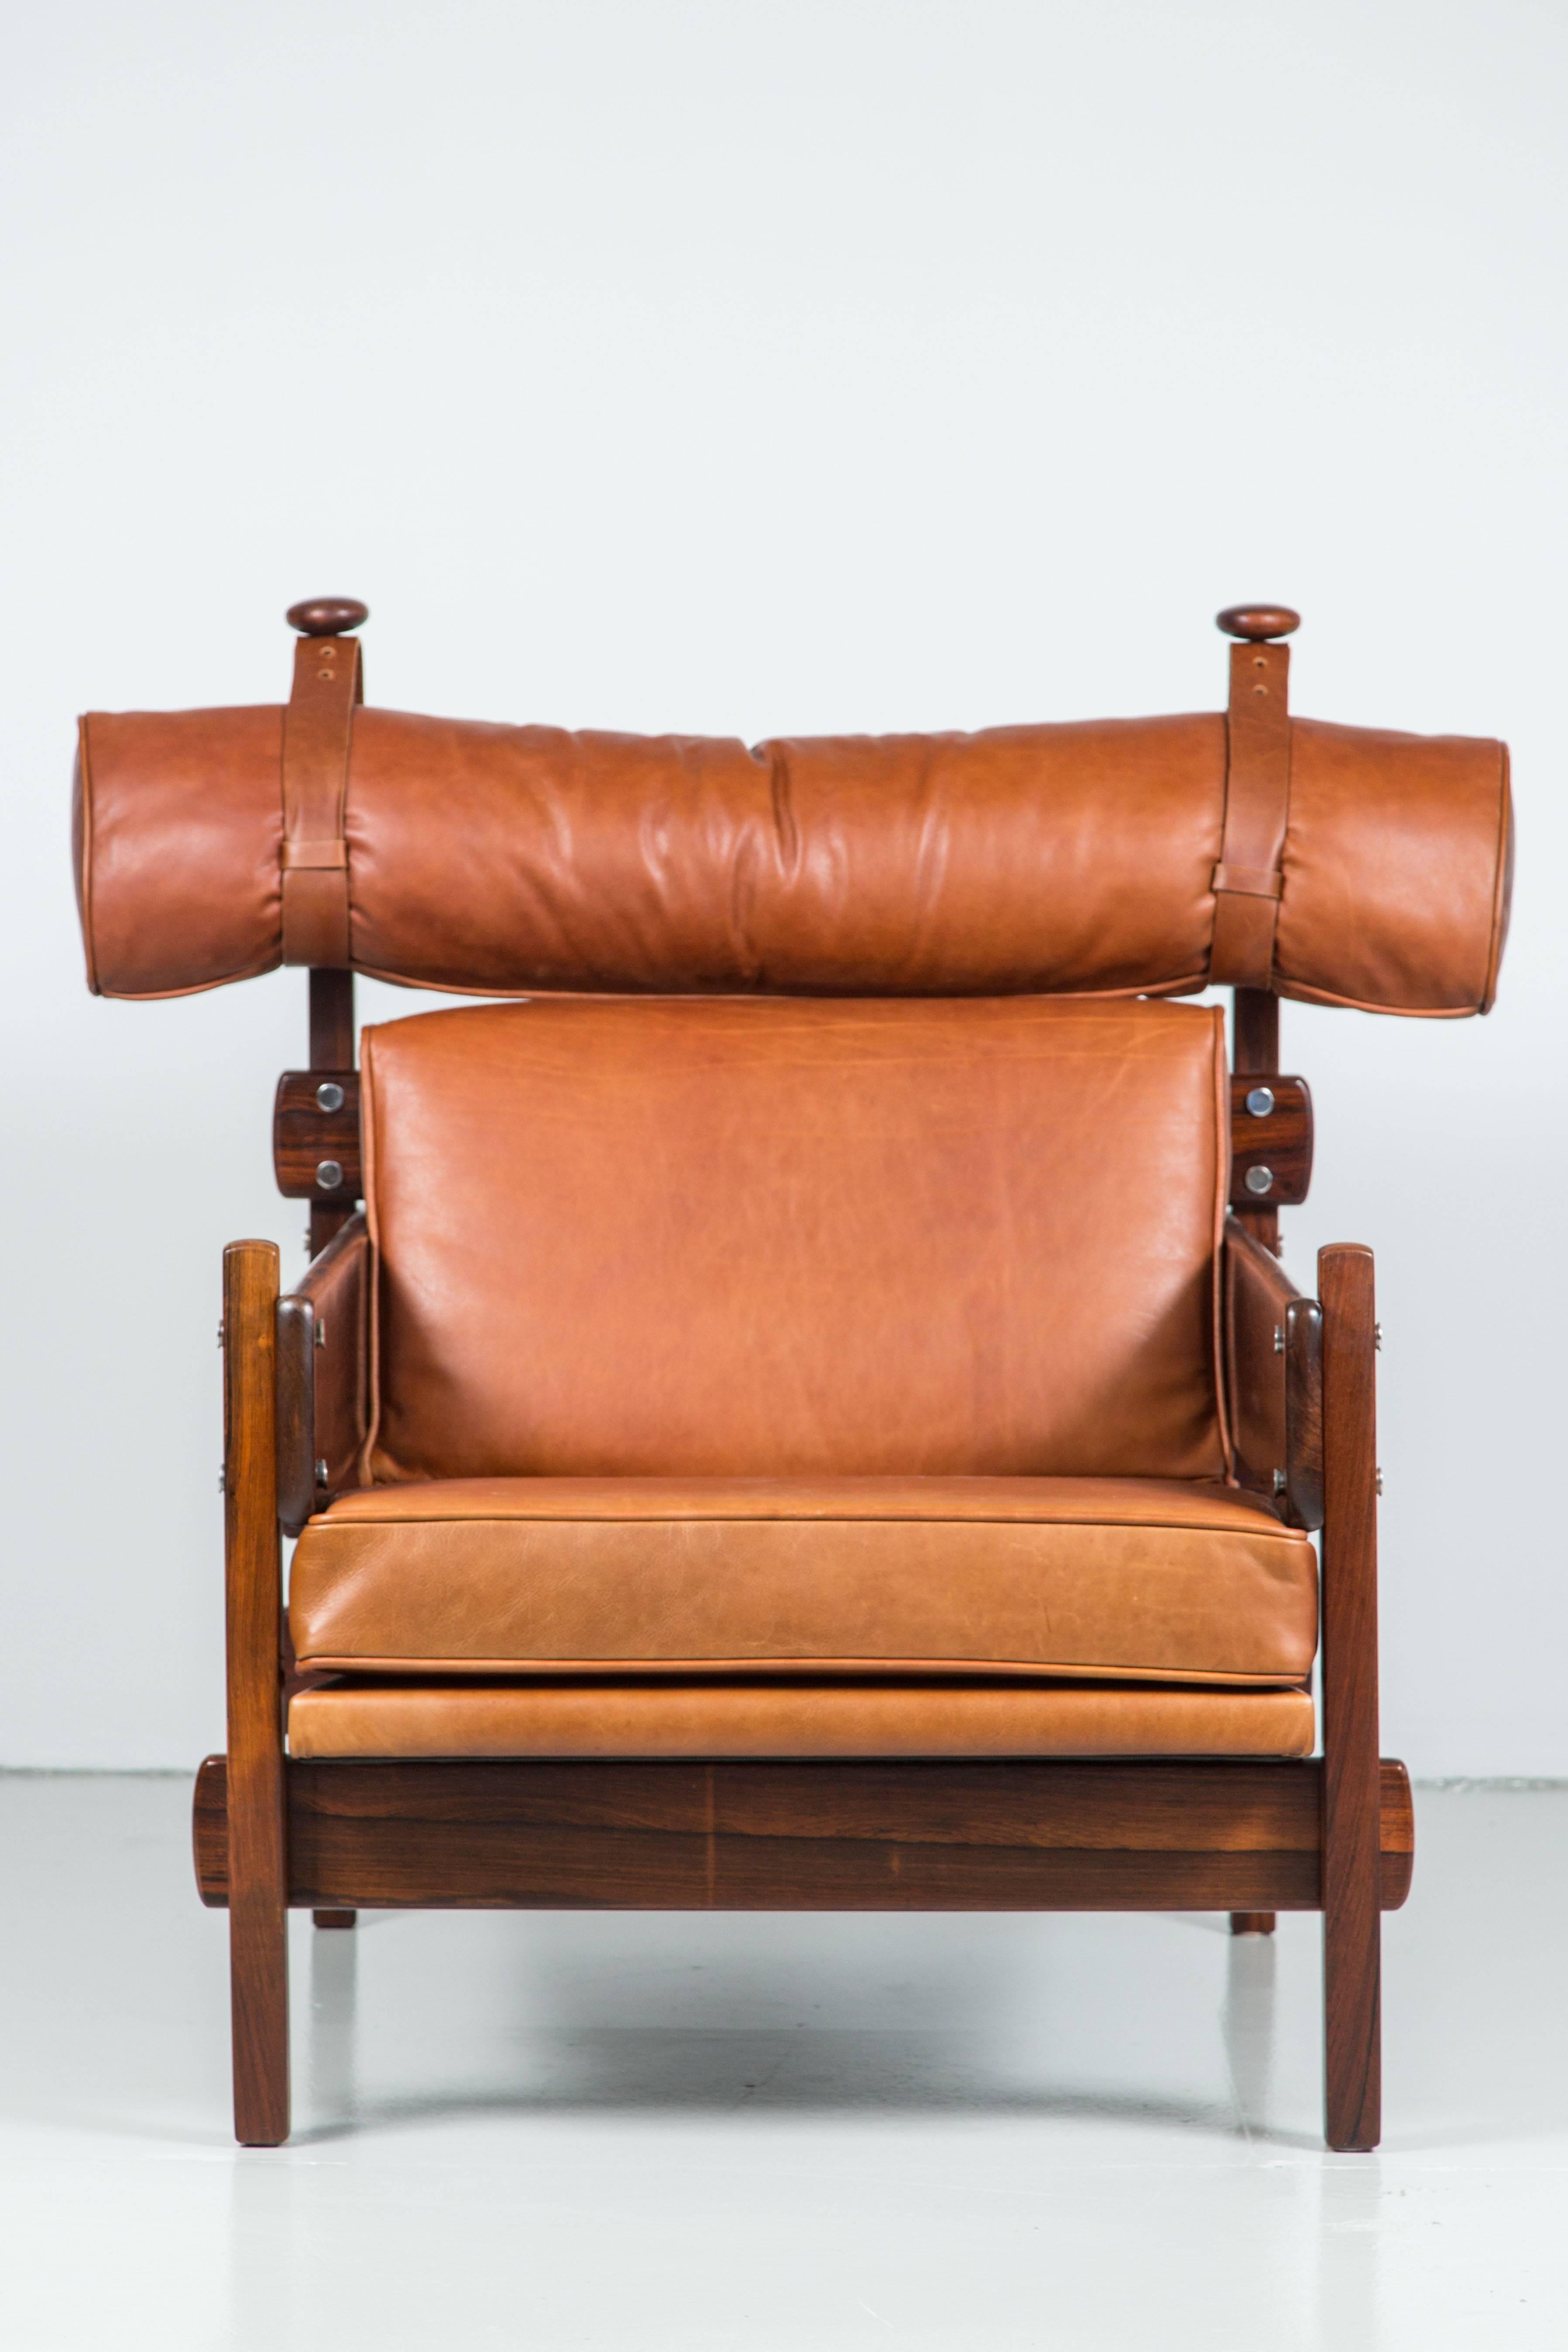 Stunning newly upholstered leather chair by Sergio Rodrigues from the 